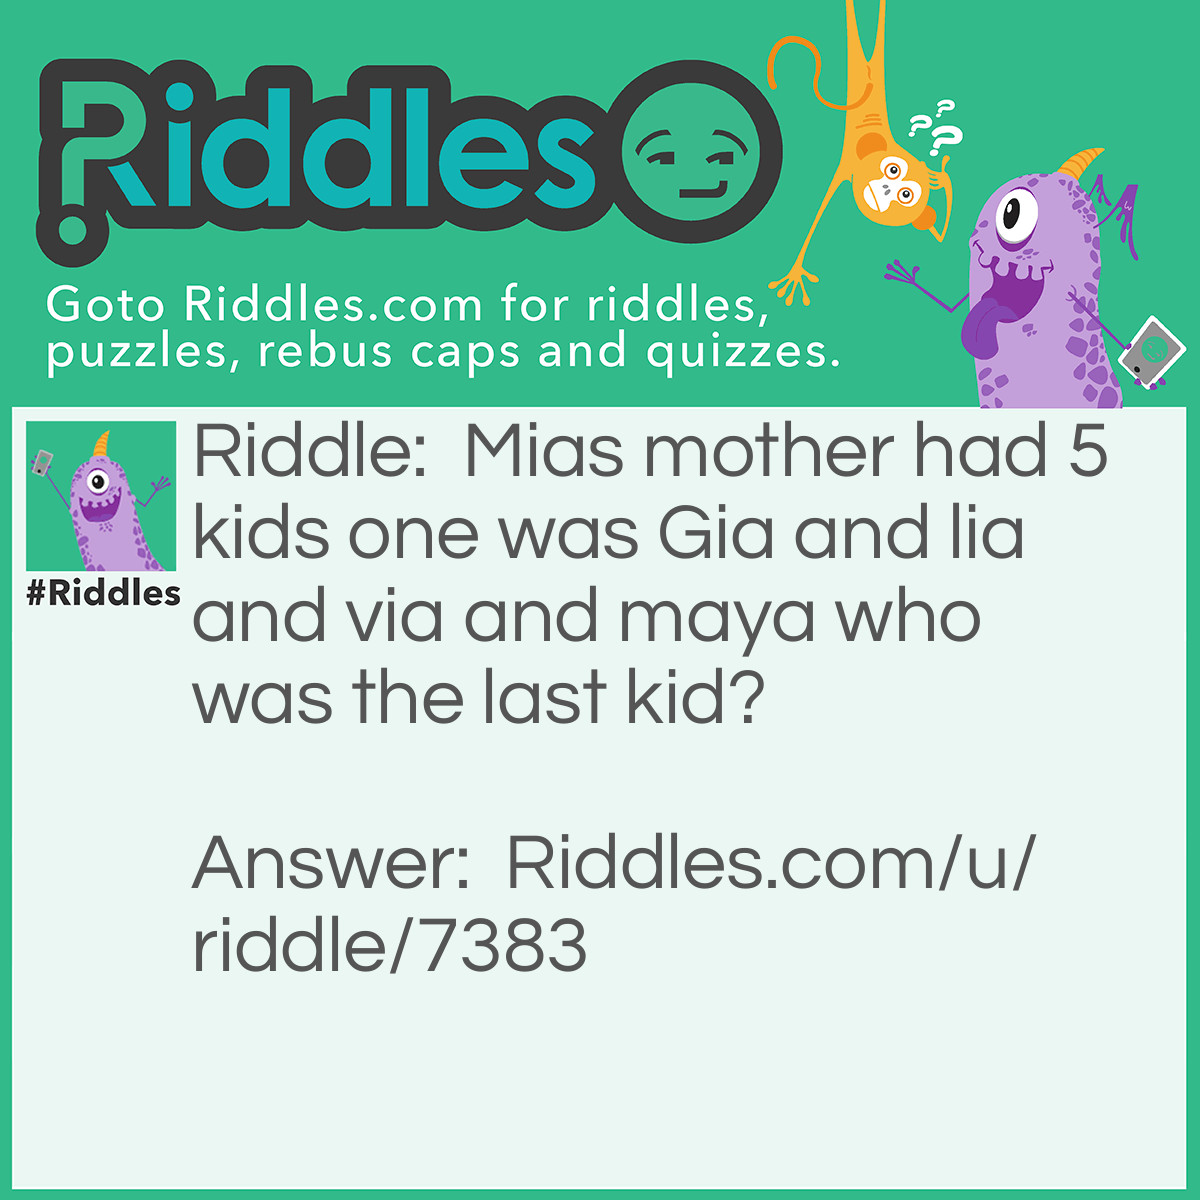 Riddle: Mias mother had 5 kids one was Gia and lia and via and maya who was the last kid? Answer: It was mia